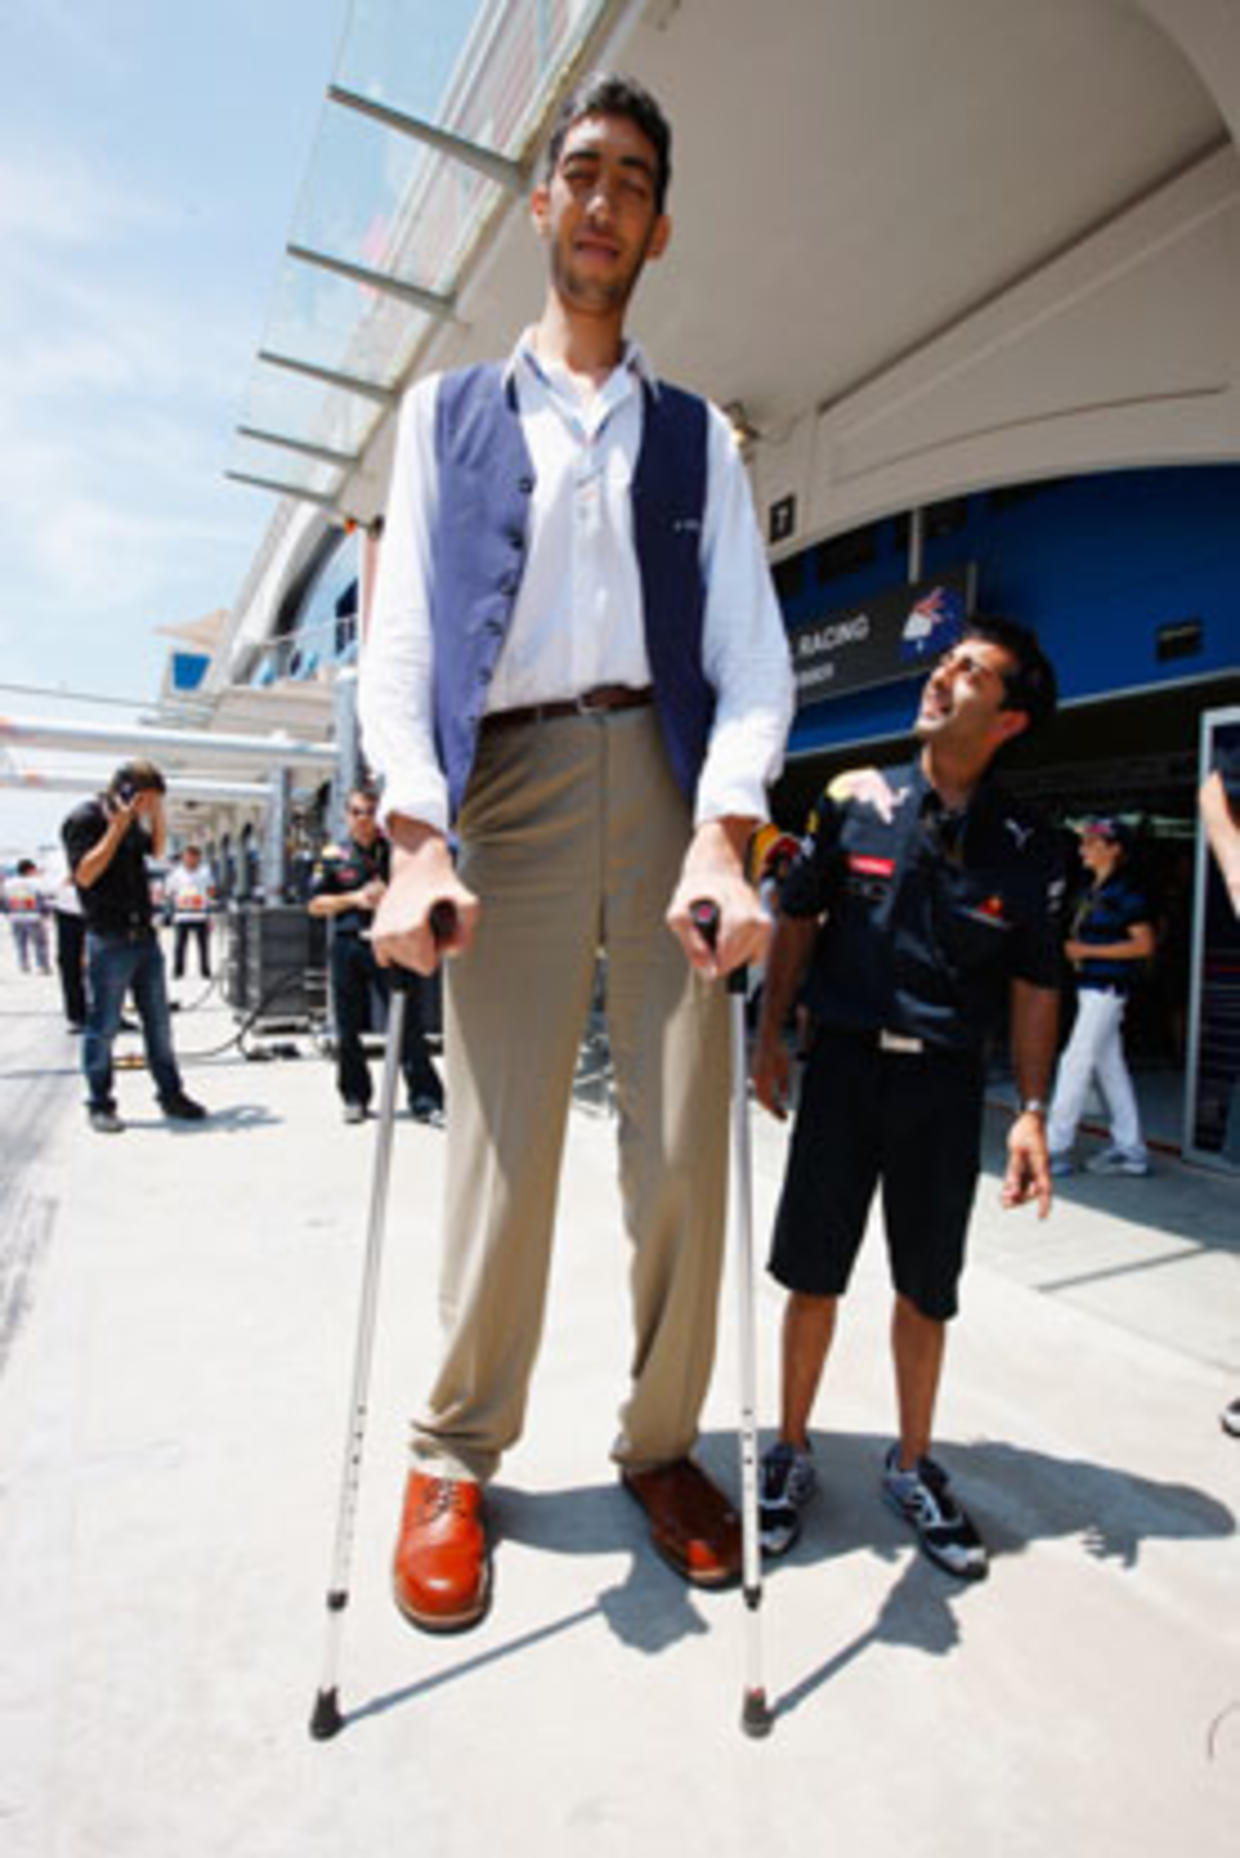 8 Foot 1 Inch Turk Crowned Worlds Tallest Man | Images and Photos finder